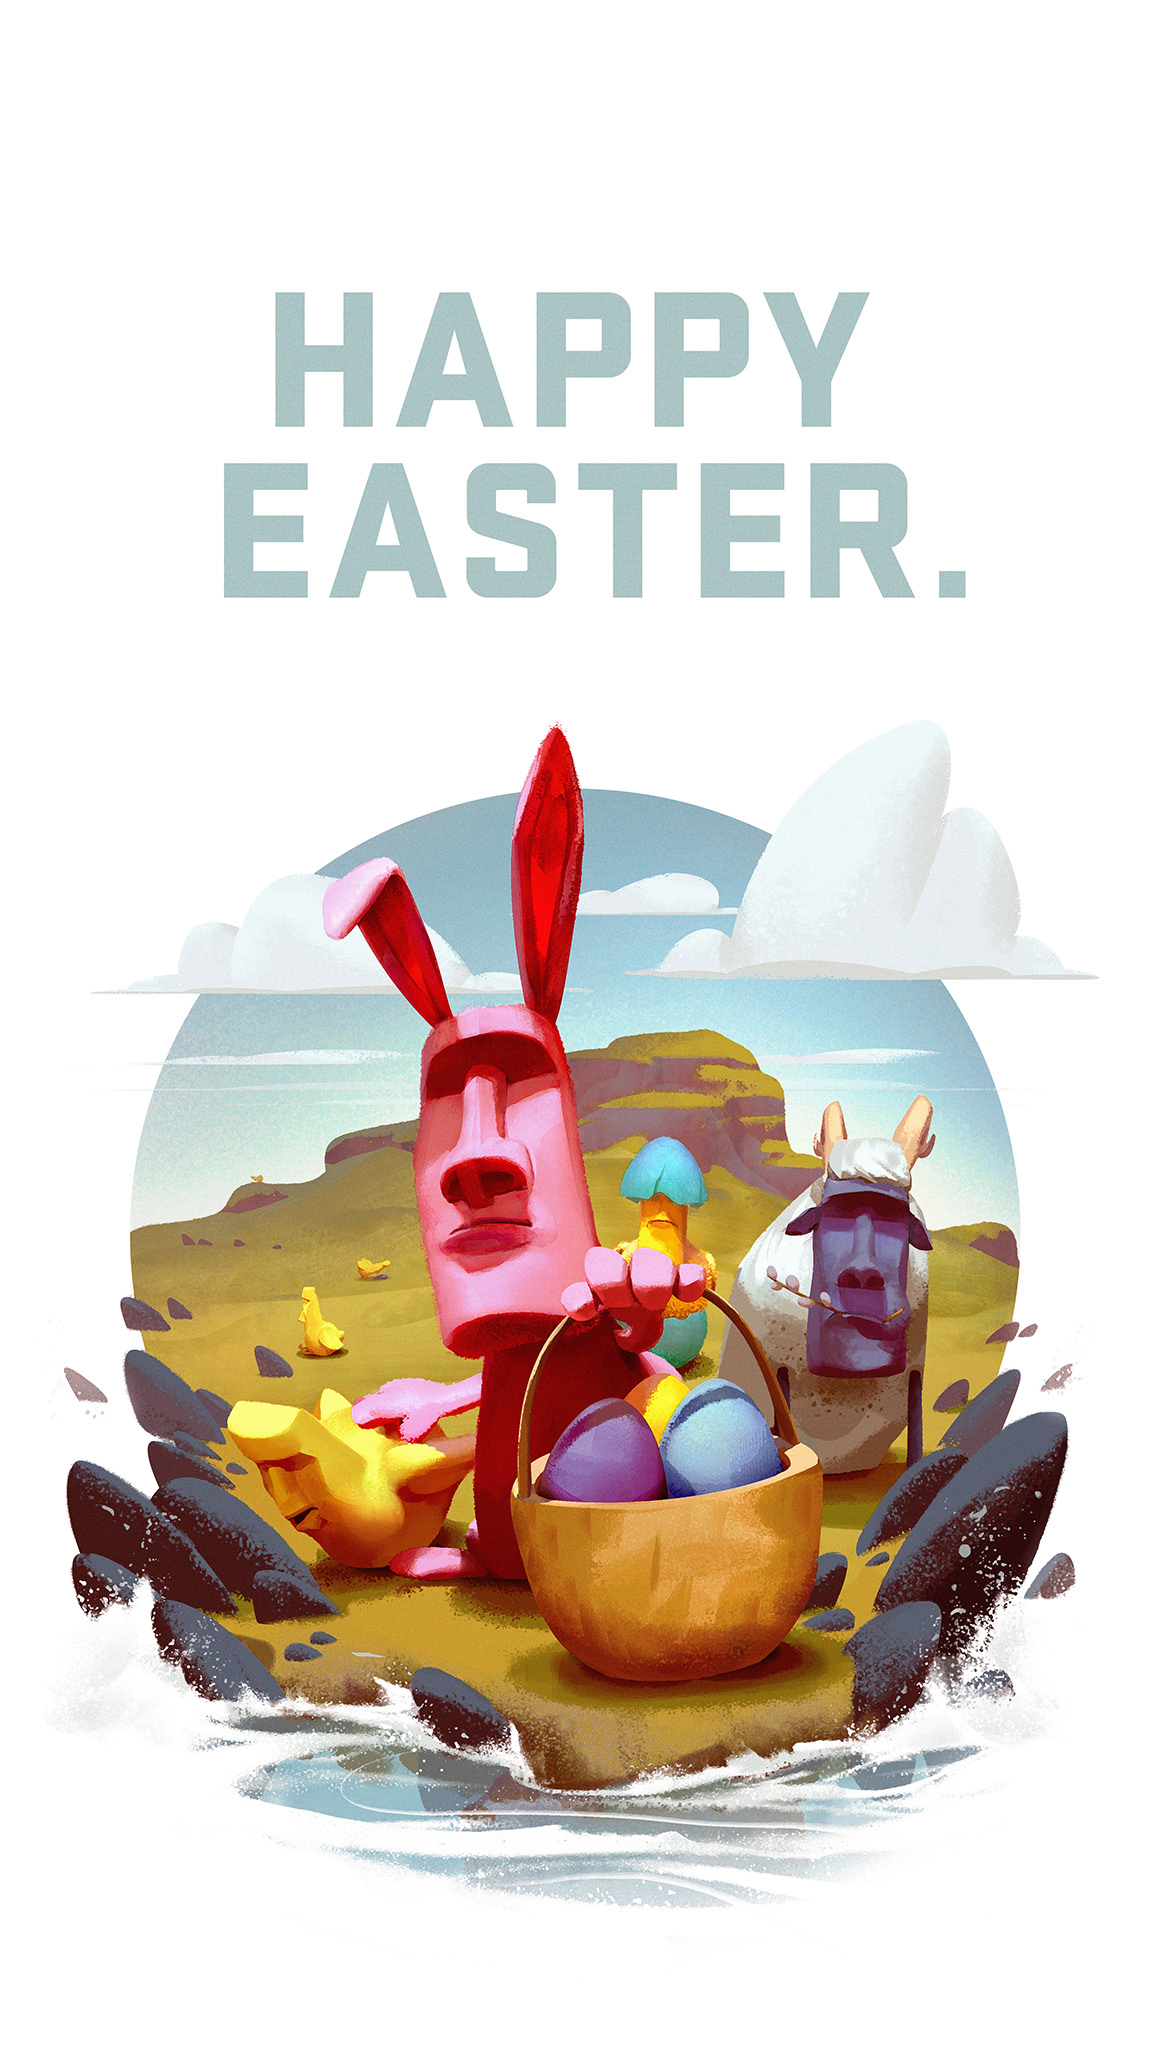 Easter happy easter island bunny chicken lamb greetings card